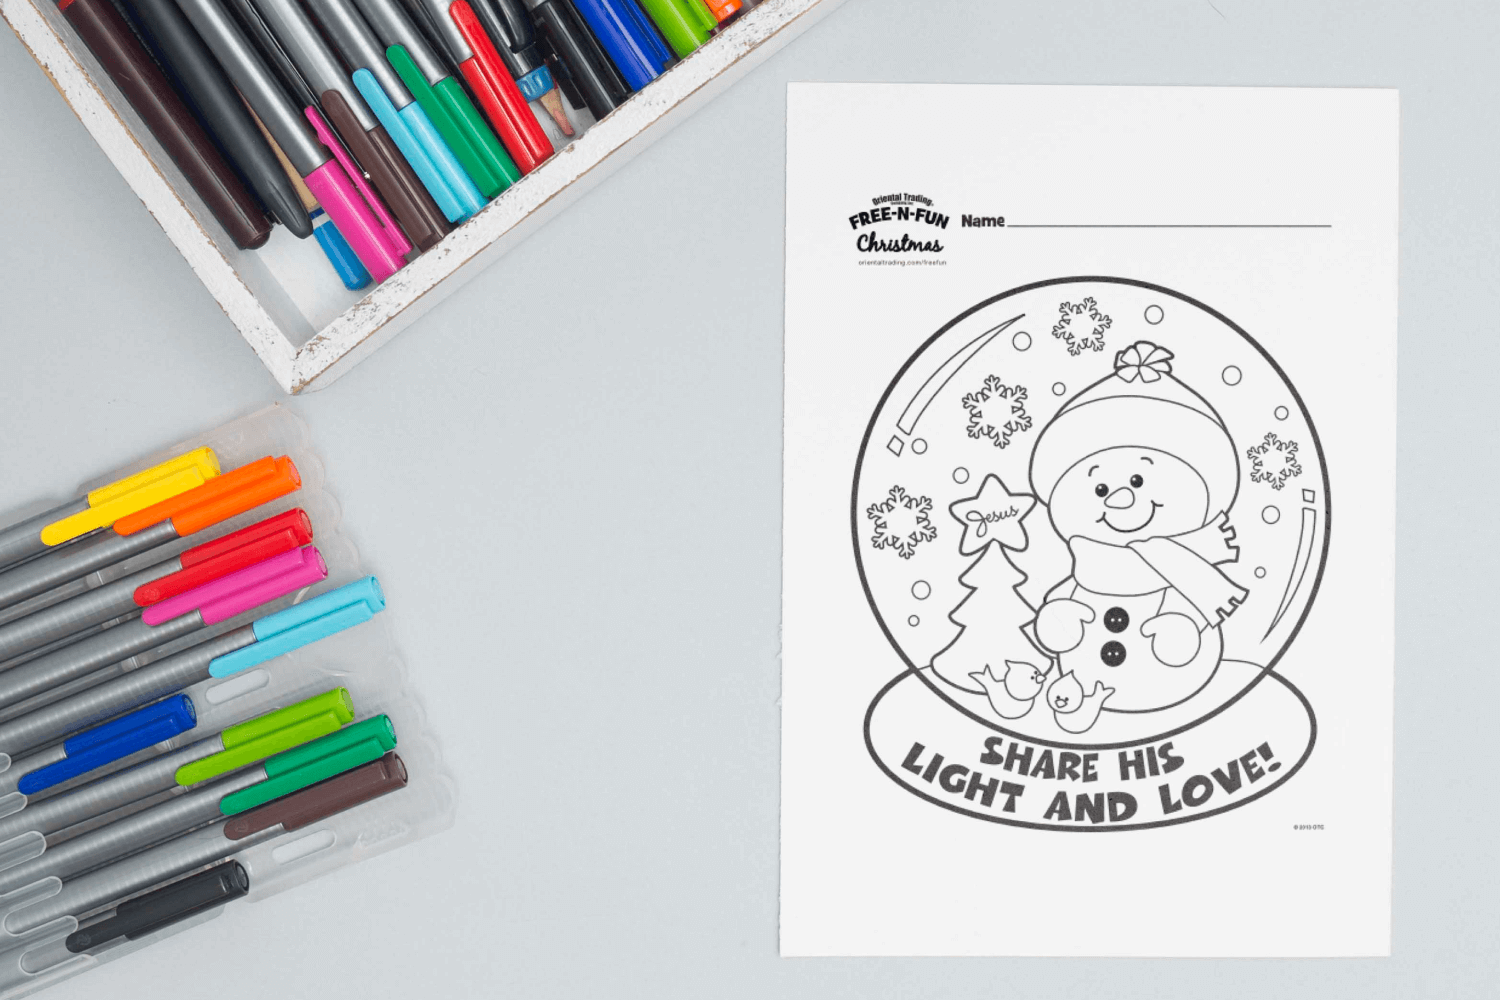 Snow globe coloring page facebook image.